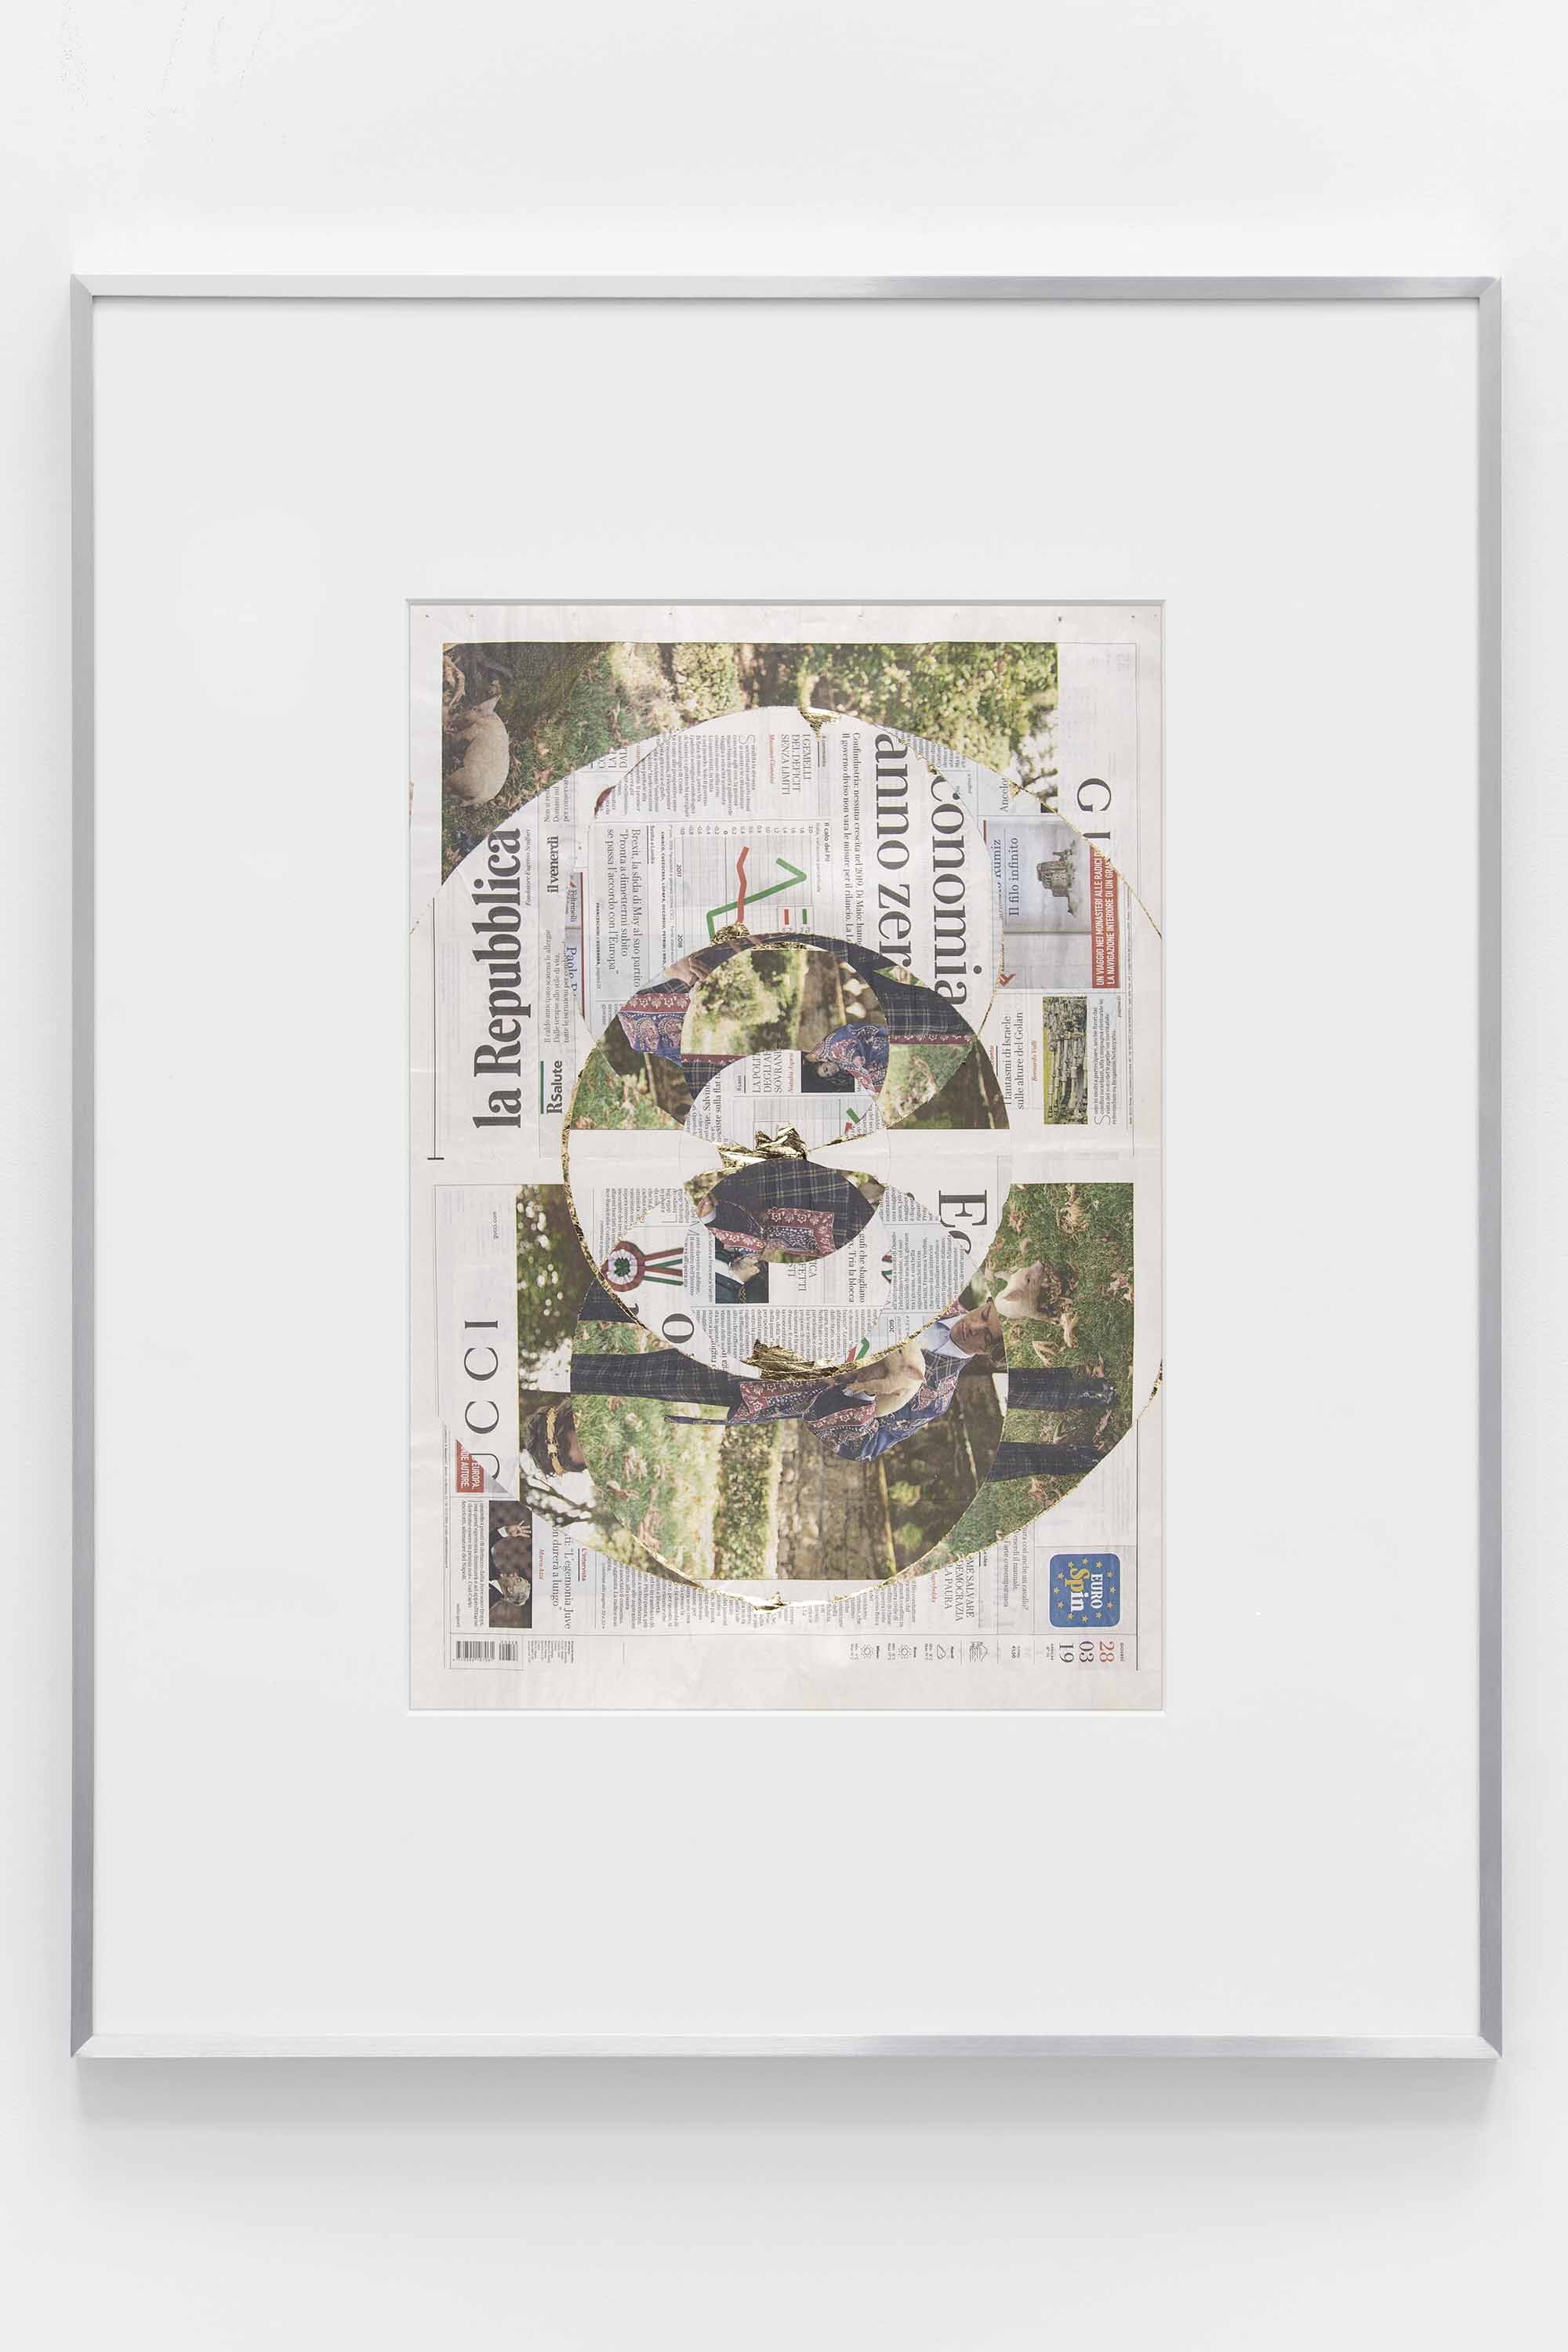   Blind Collage (Seven 180º Rotations, La Repubblica: Naples, Italy, Thursday, March 28, 2019)    2021   Newspaper, tape, and 22 karat gold leaf  39 1/8 x 31 1/4 inches  Exhibition:   Foreign Correspondence, 2021  